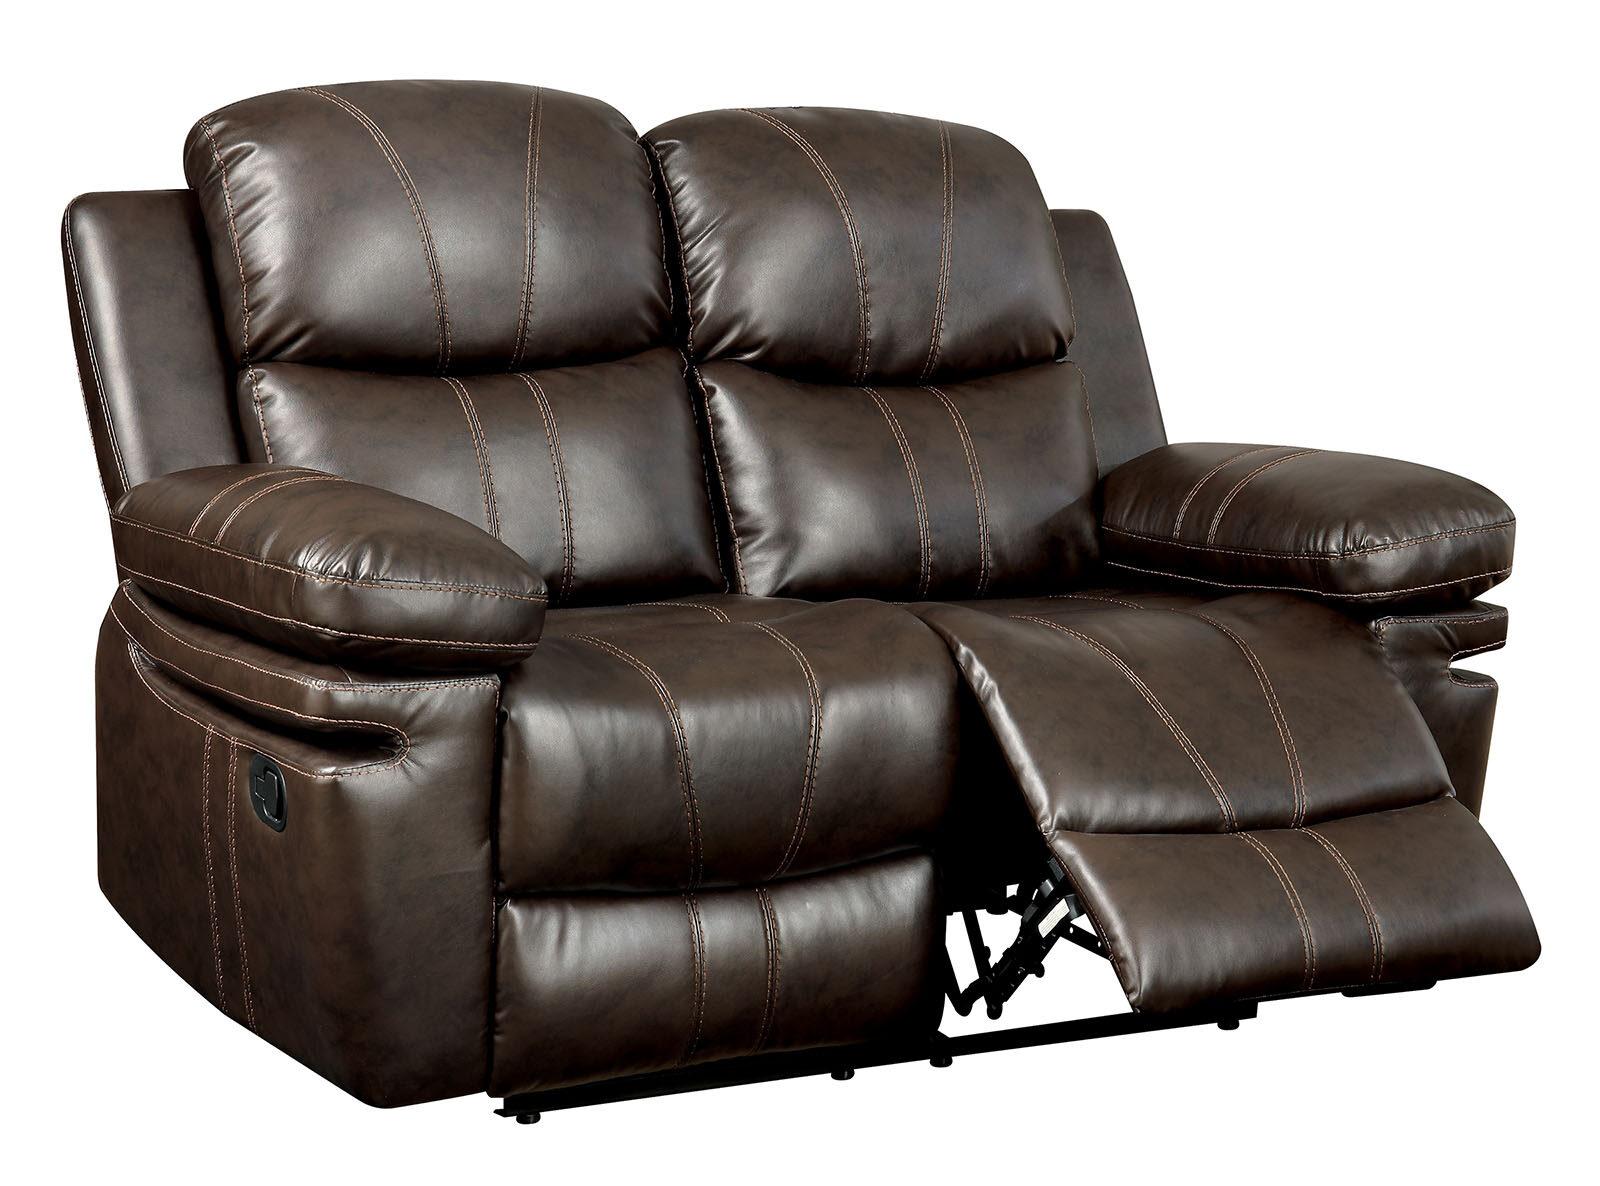 

    
Furniture of America CM6992-2PC Listowel Recliner Sofa and Loveseat Brown CM6992-2PC
